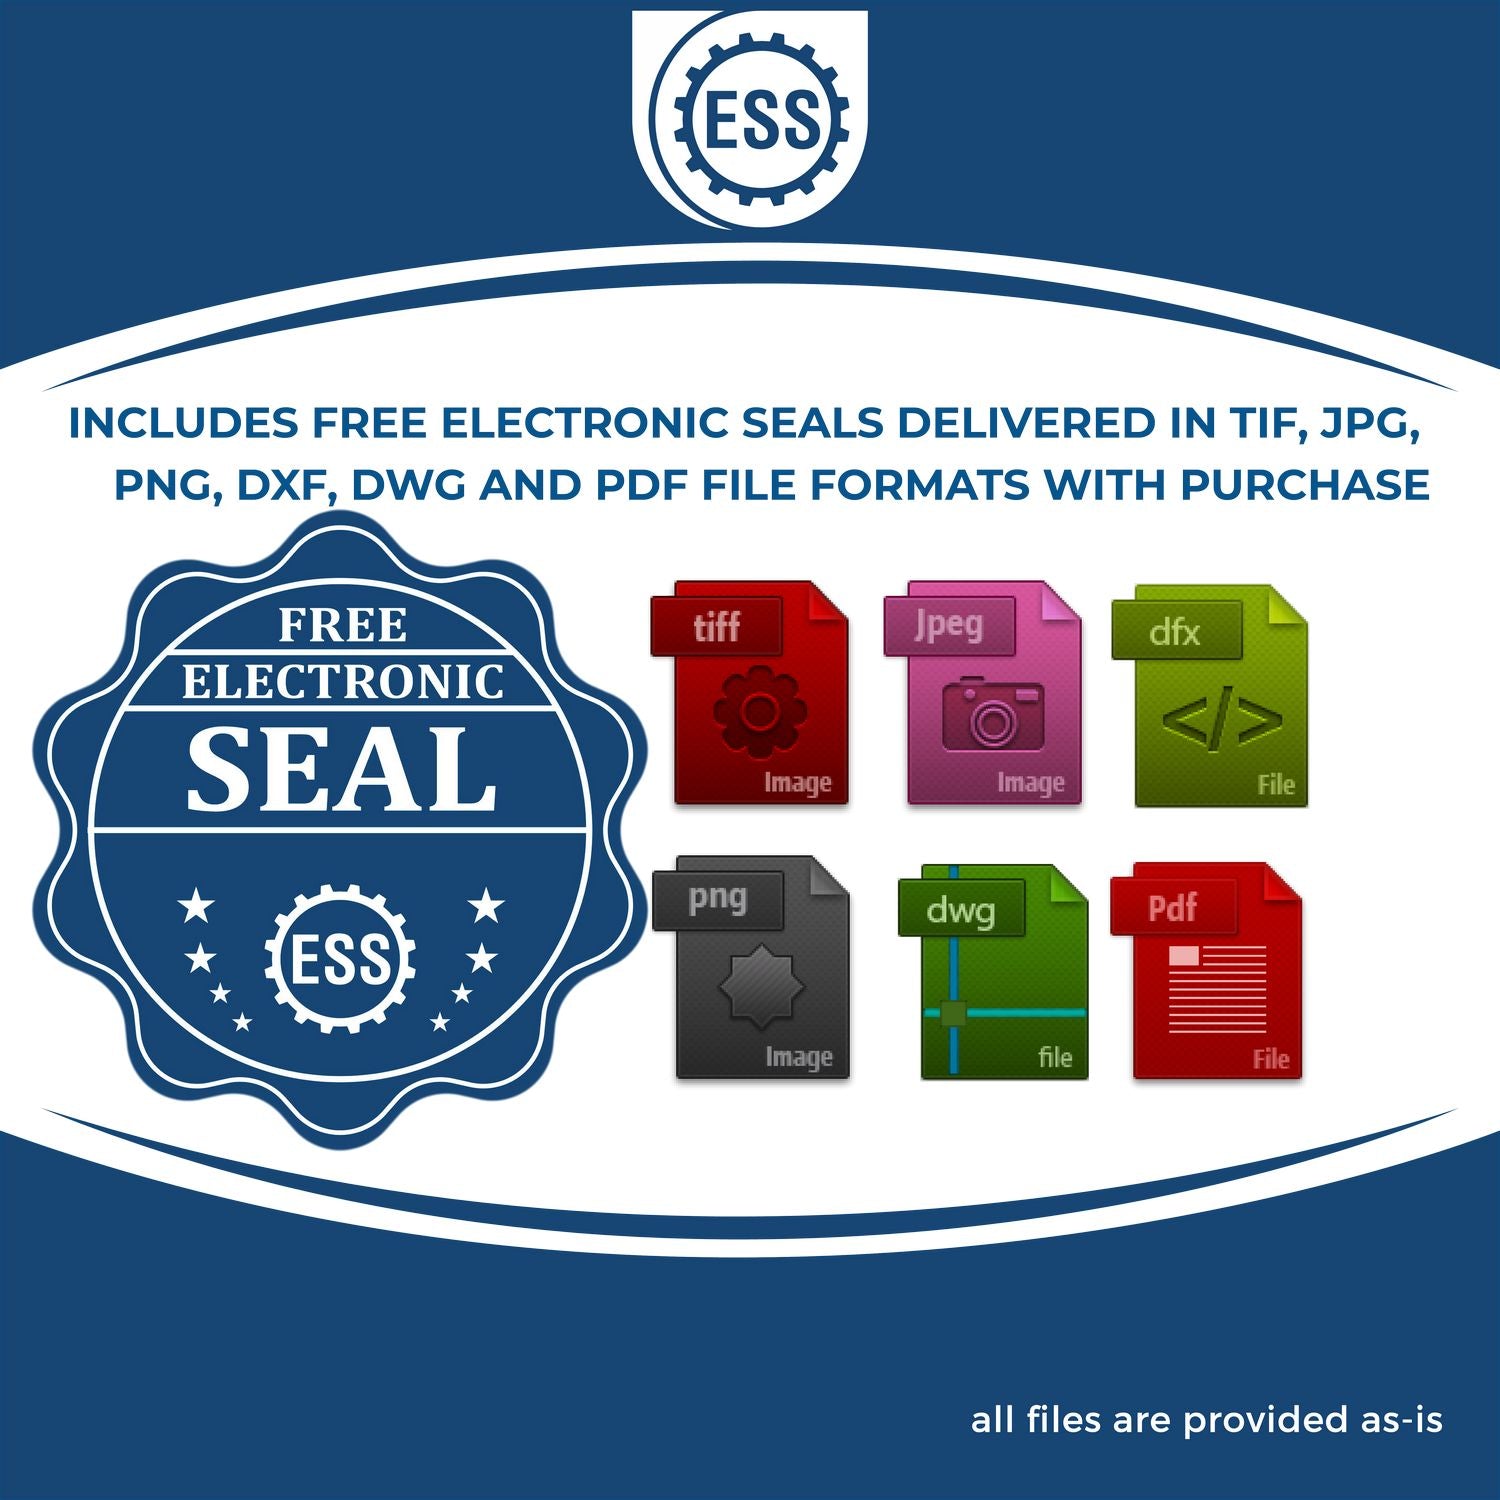 An infographic for the free electronic seal for the Arkansas Desk Architect Embossing Seal illustrating the different file type icons such as DXF, DWG, TIF, JPG and PNG.